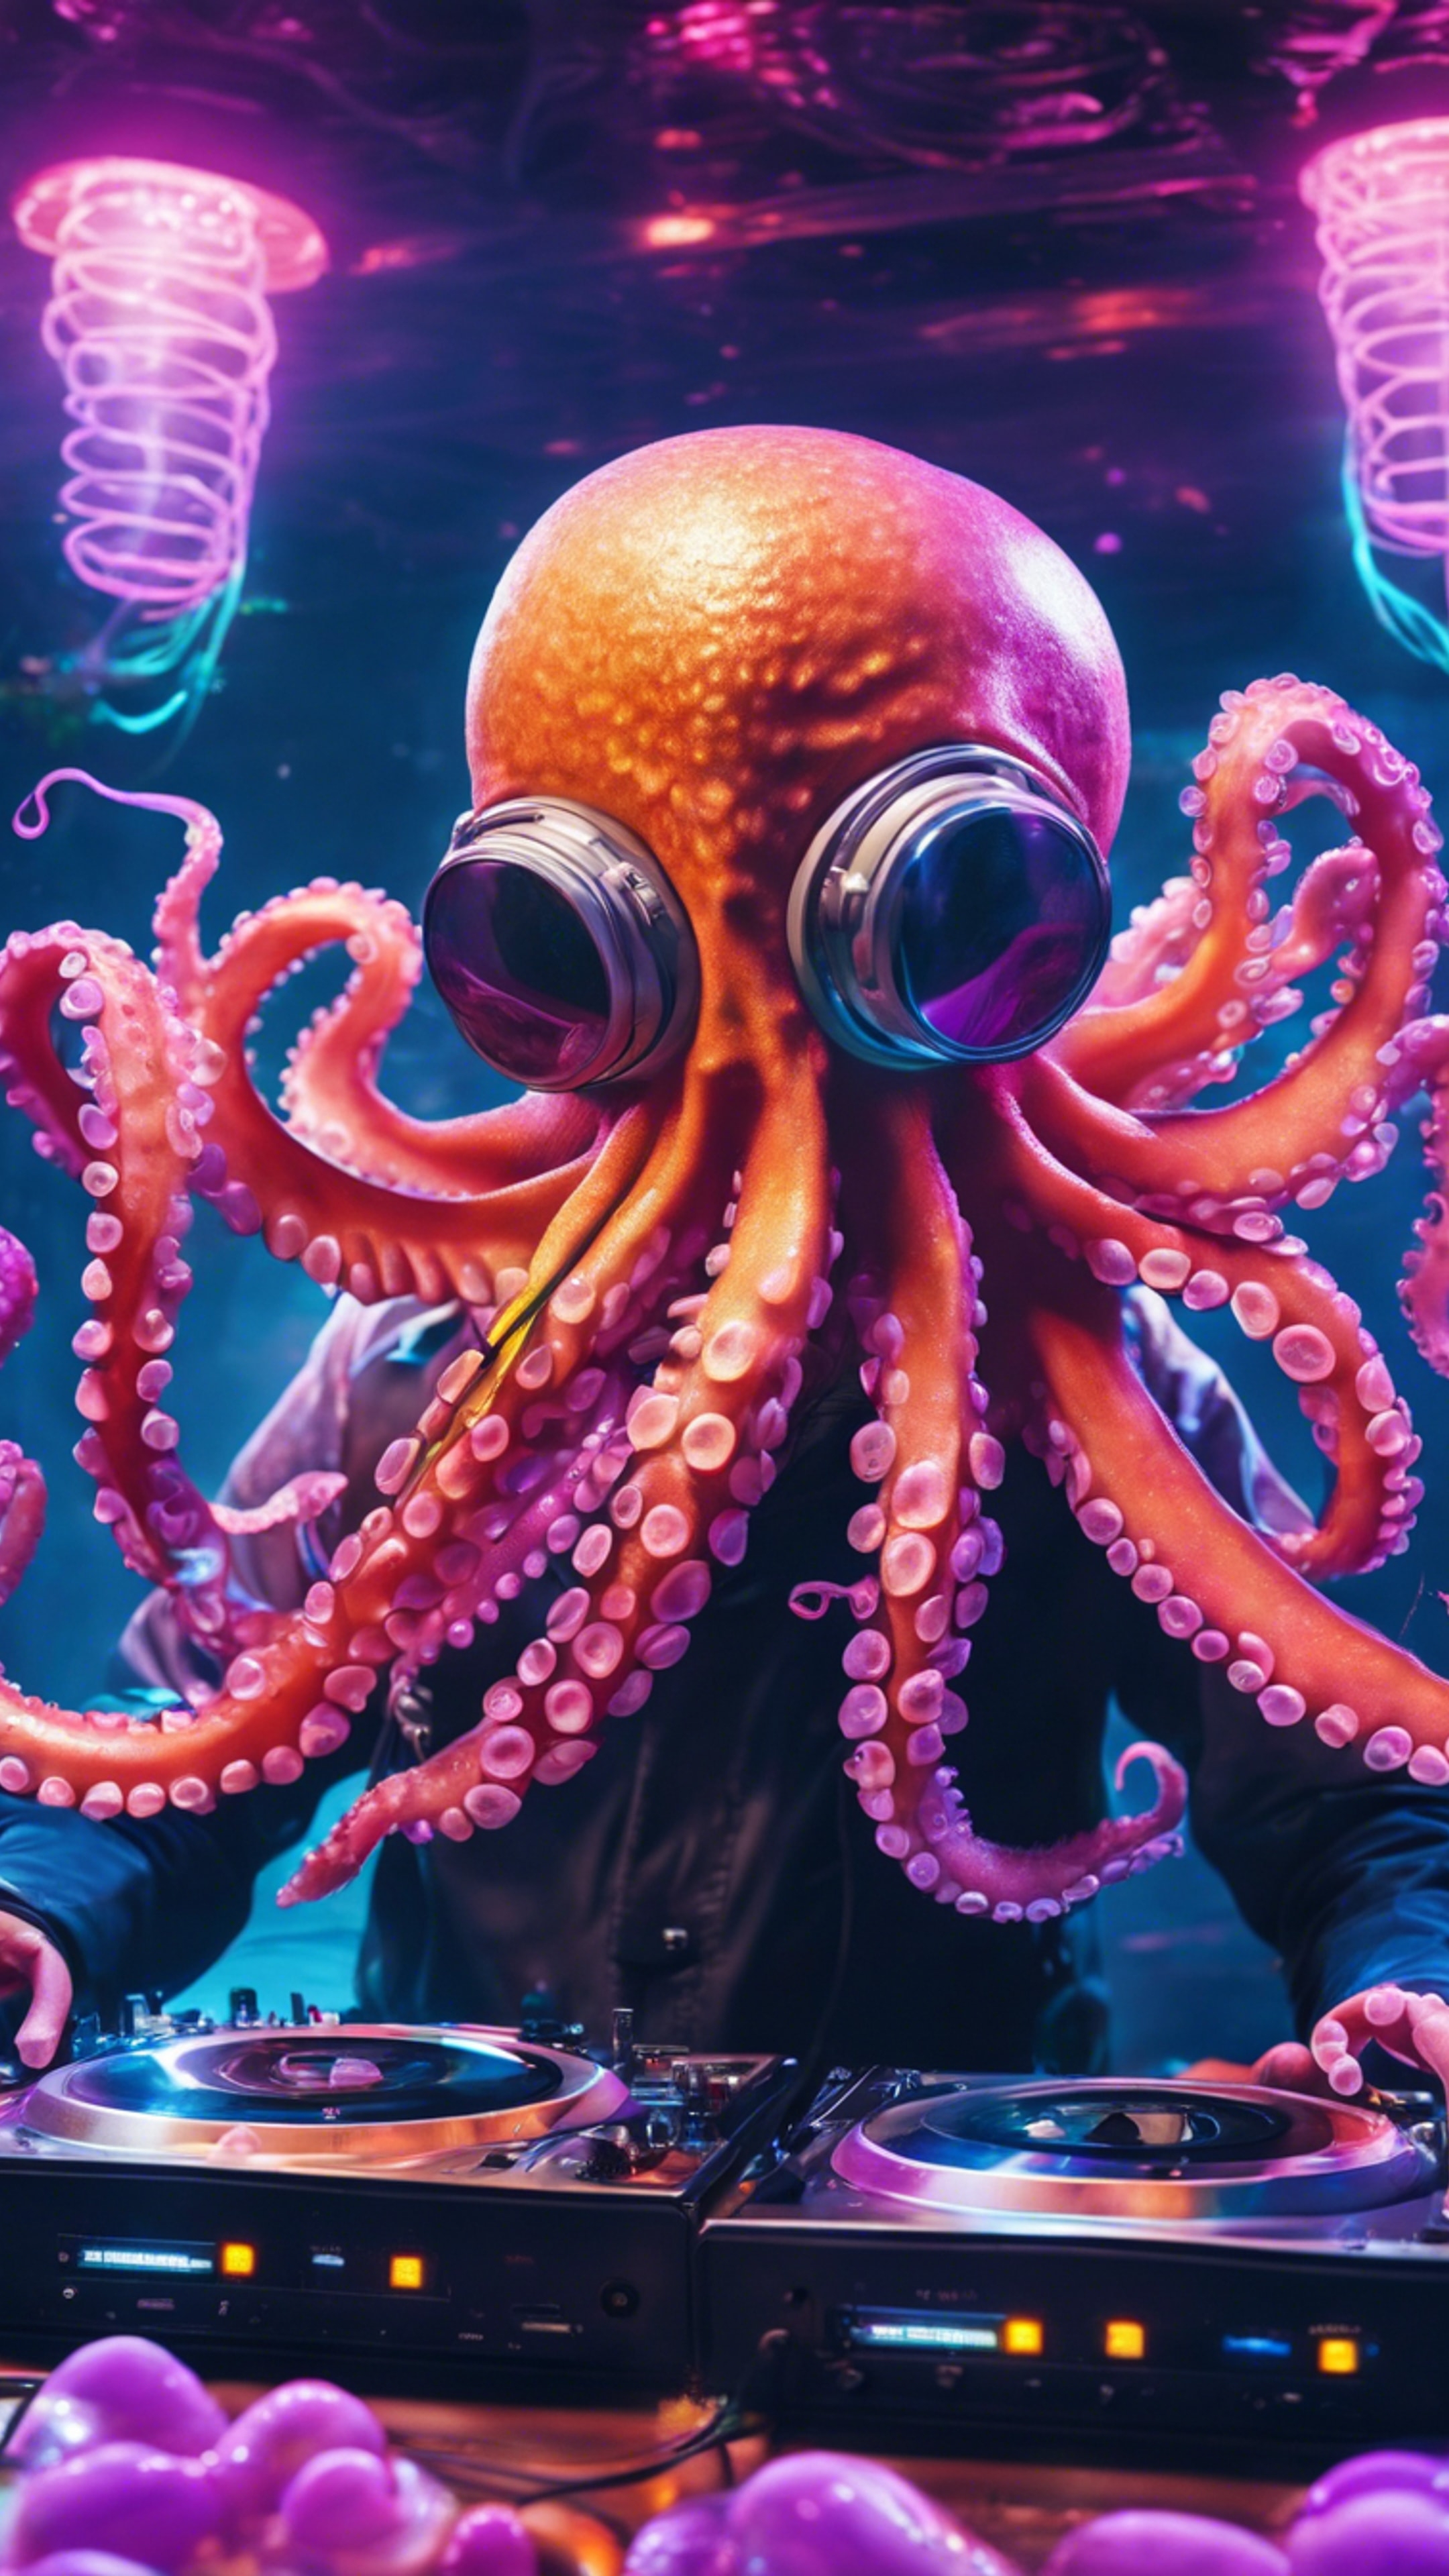 An octopus DJ controlling the music at an underwater rave amidst neon jellyfish. Wallpaper[8d0f478d59094f5192d2]